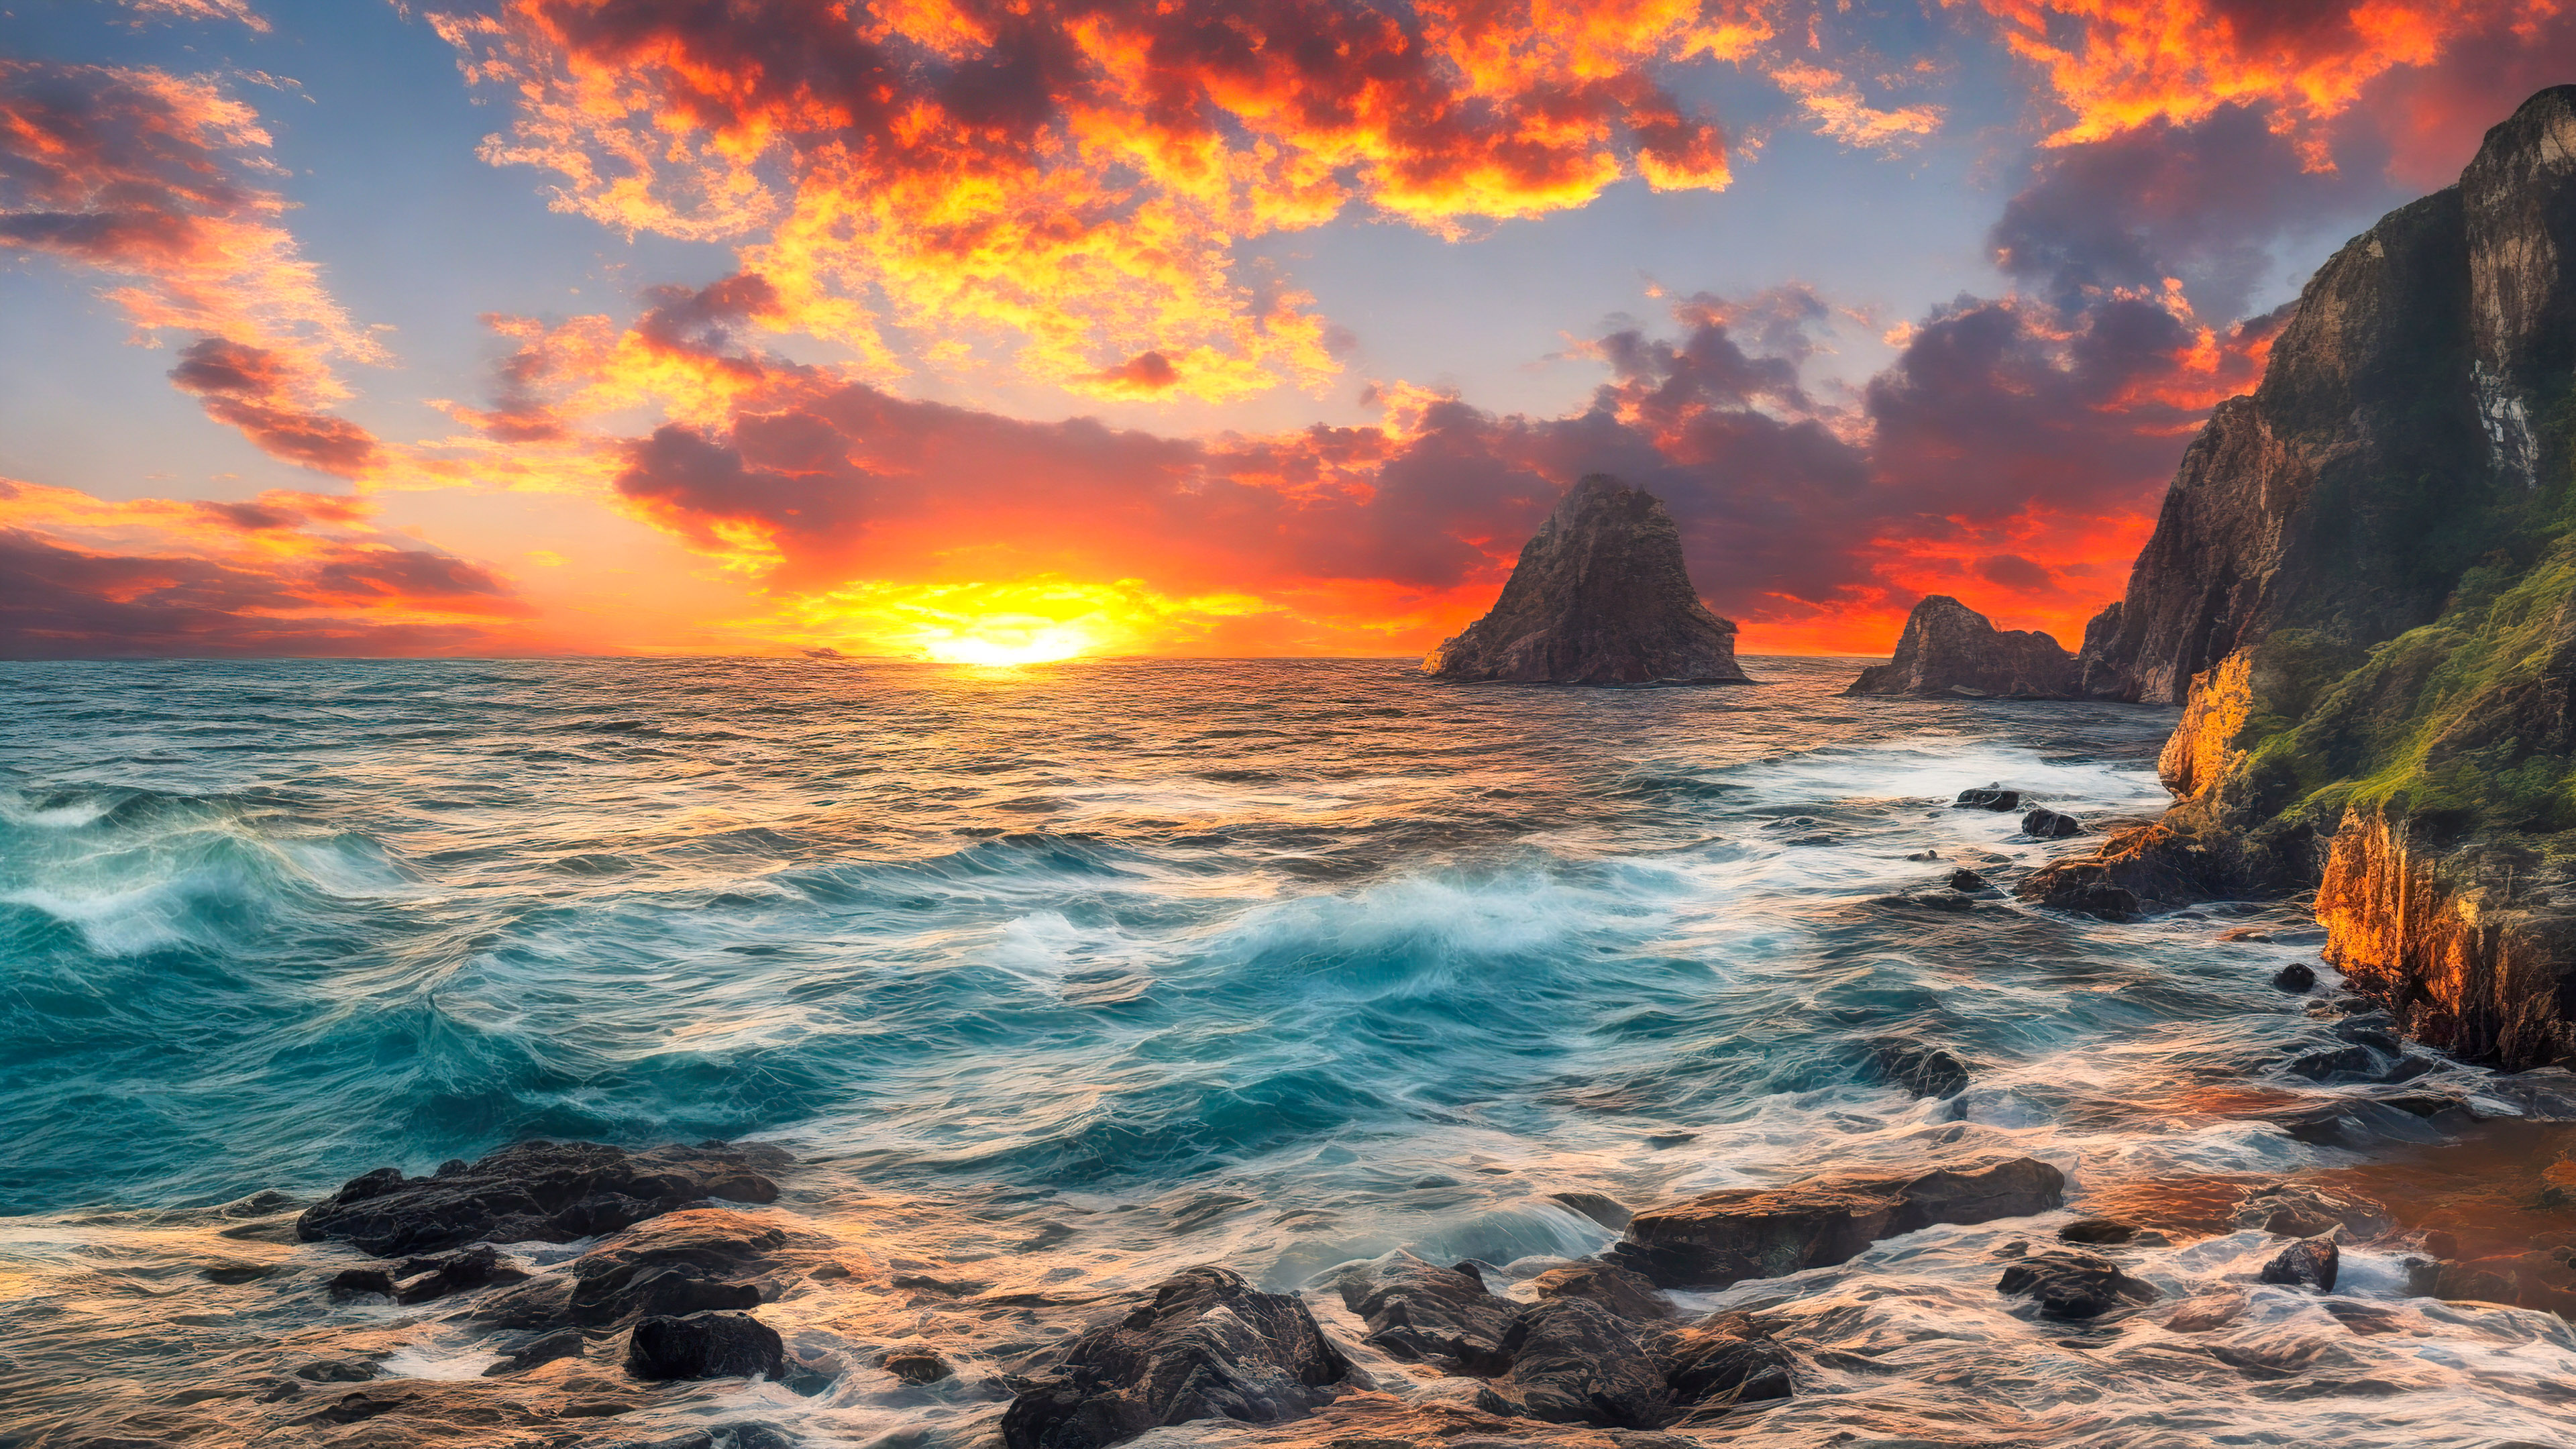 Discover the grandeur of a stunning coastal view with rugged cliffs, crashing waves, and a fiery sunset with our nature desktop wallpaper in 4K.